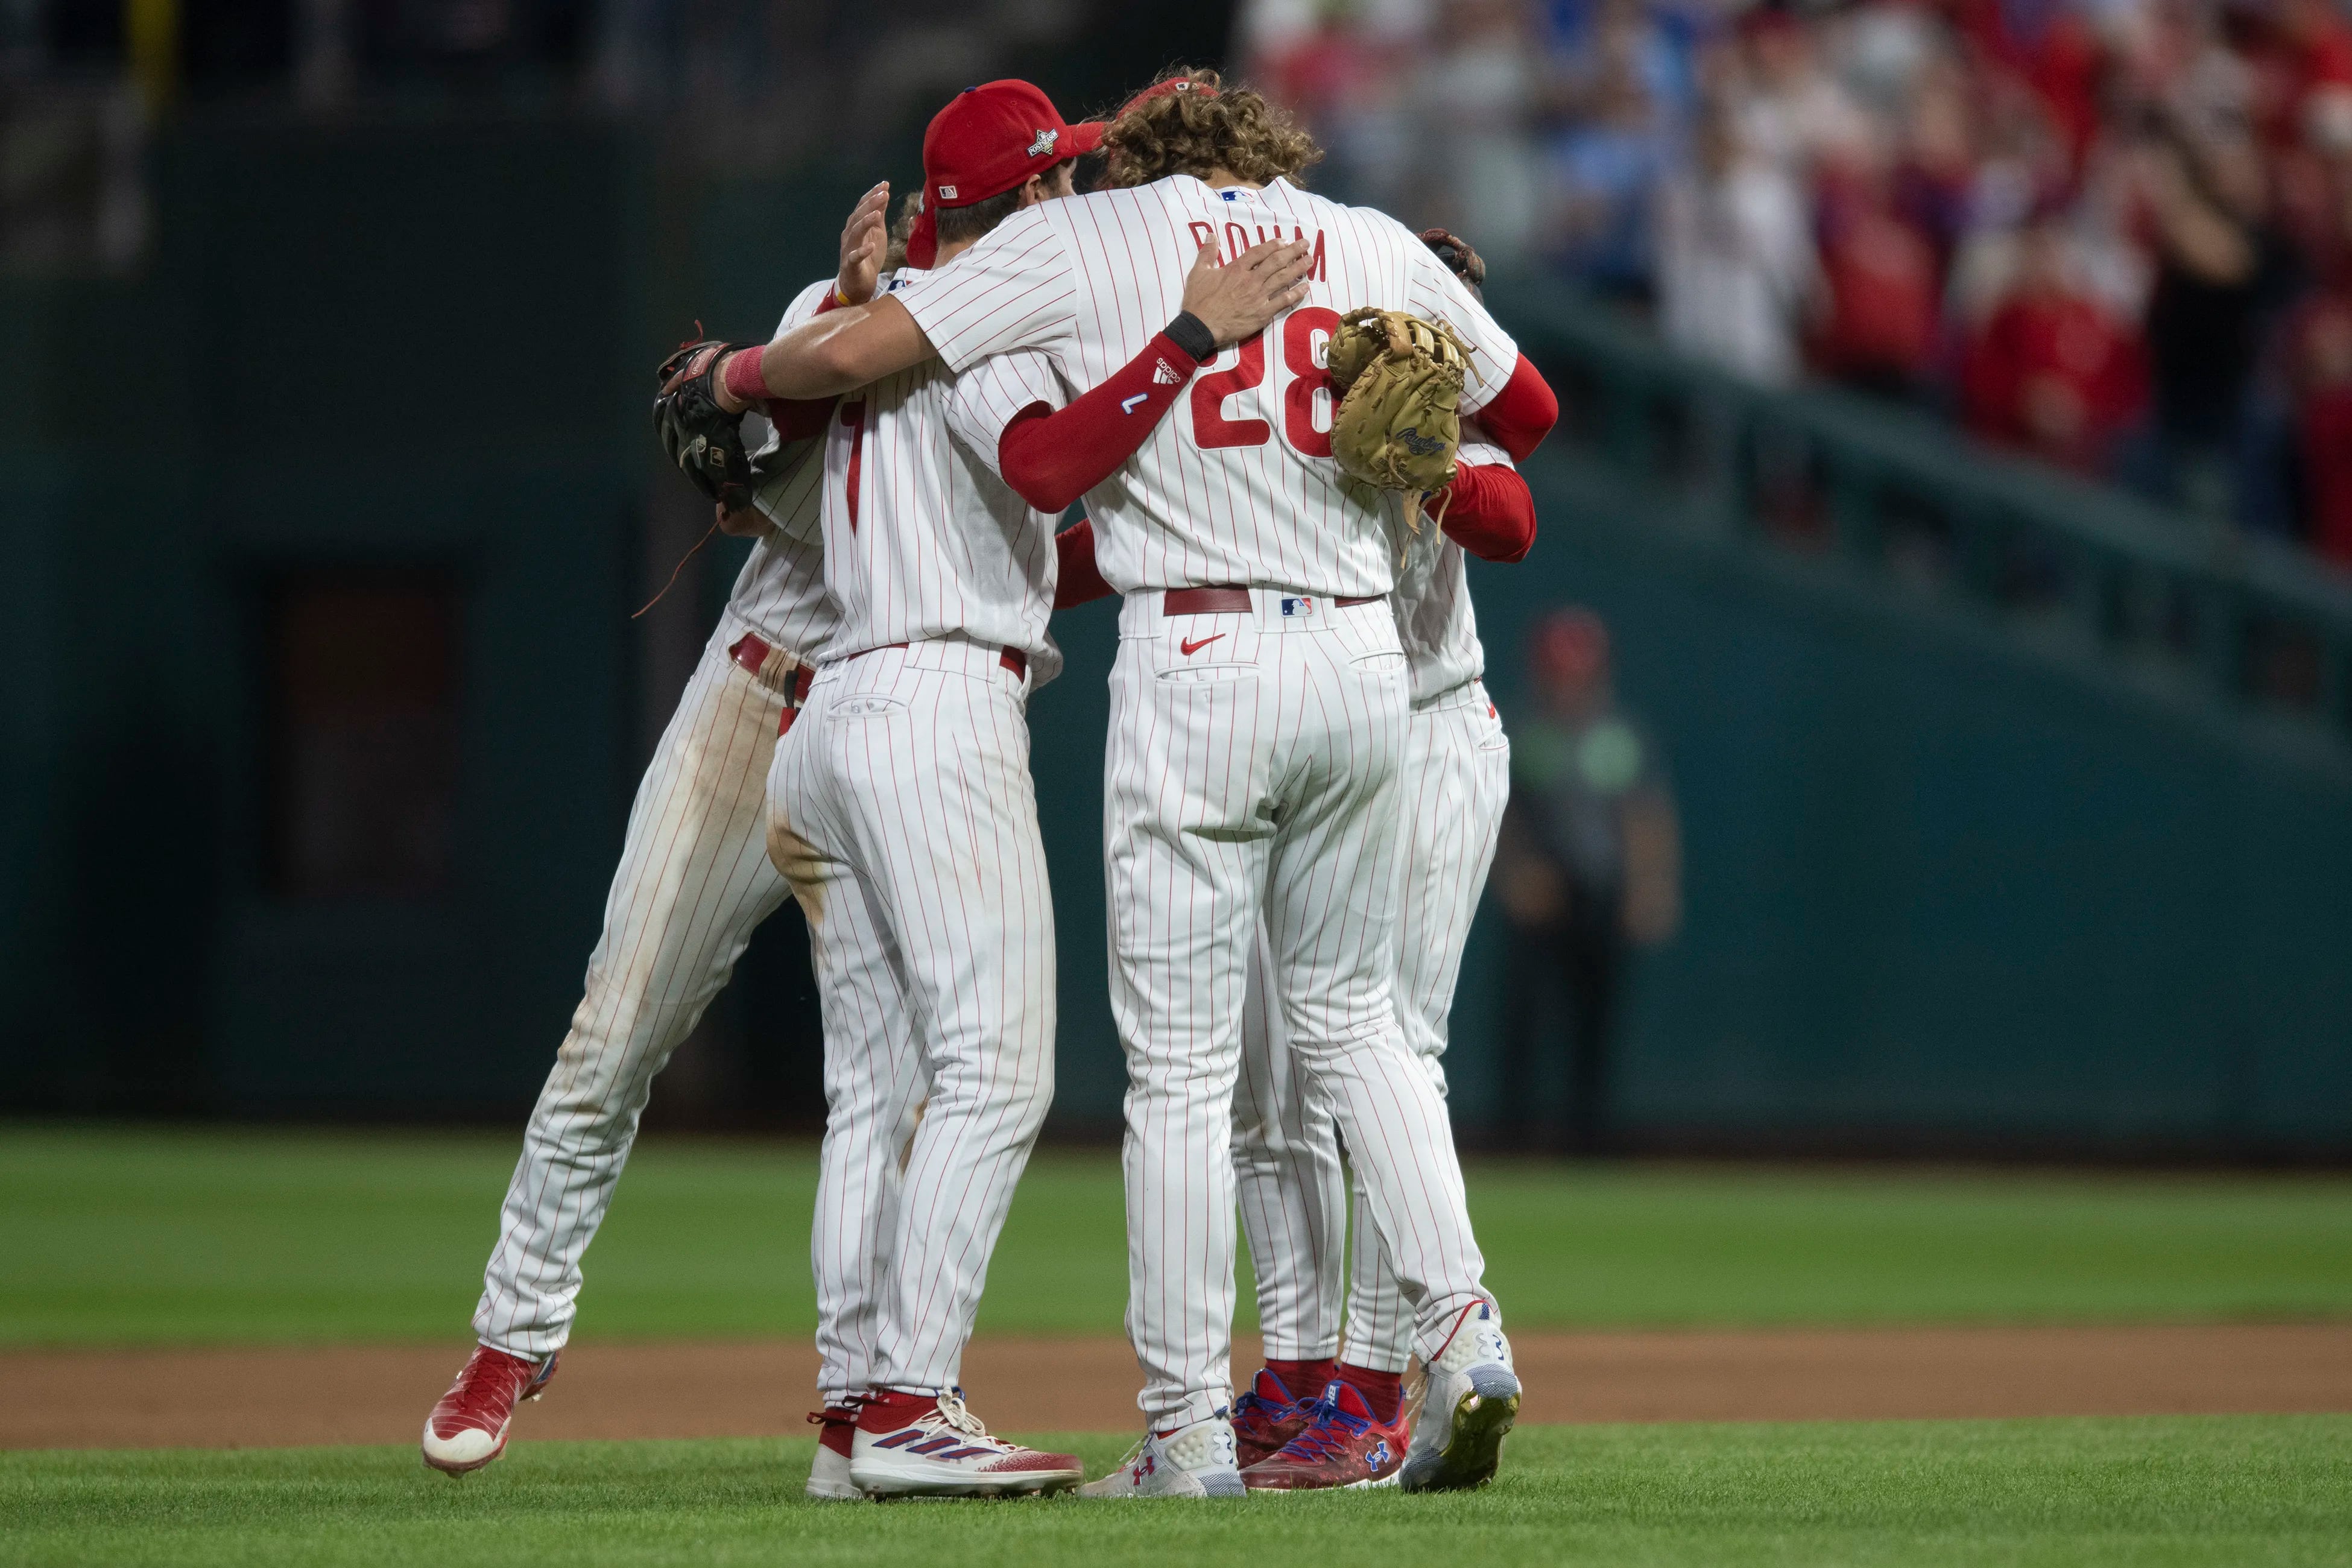 Phillies vs. Braves: MLB National League Division Series Game 3